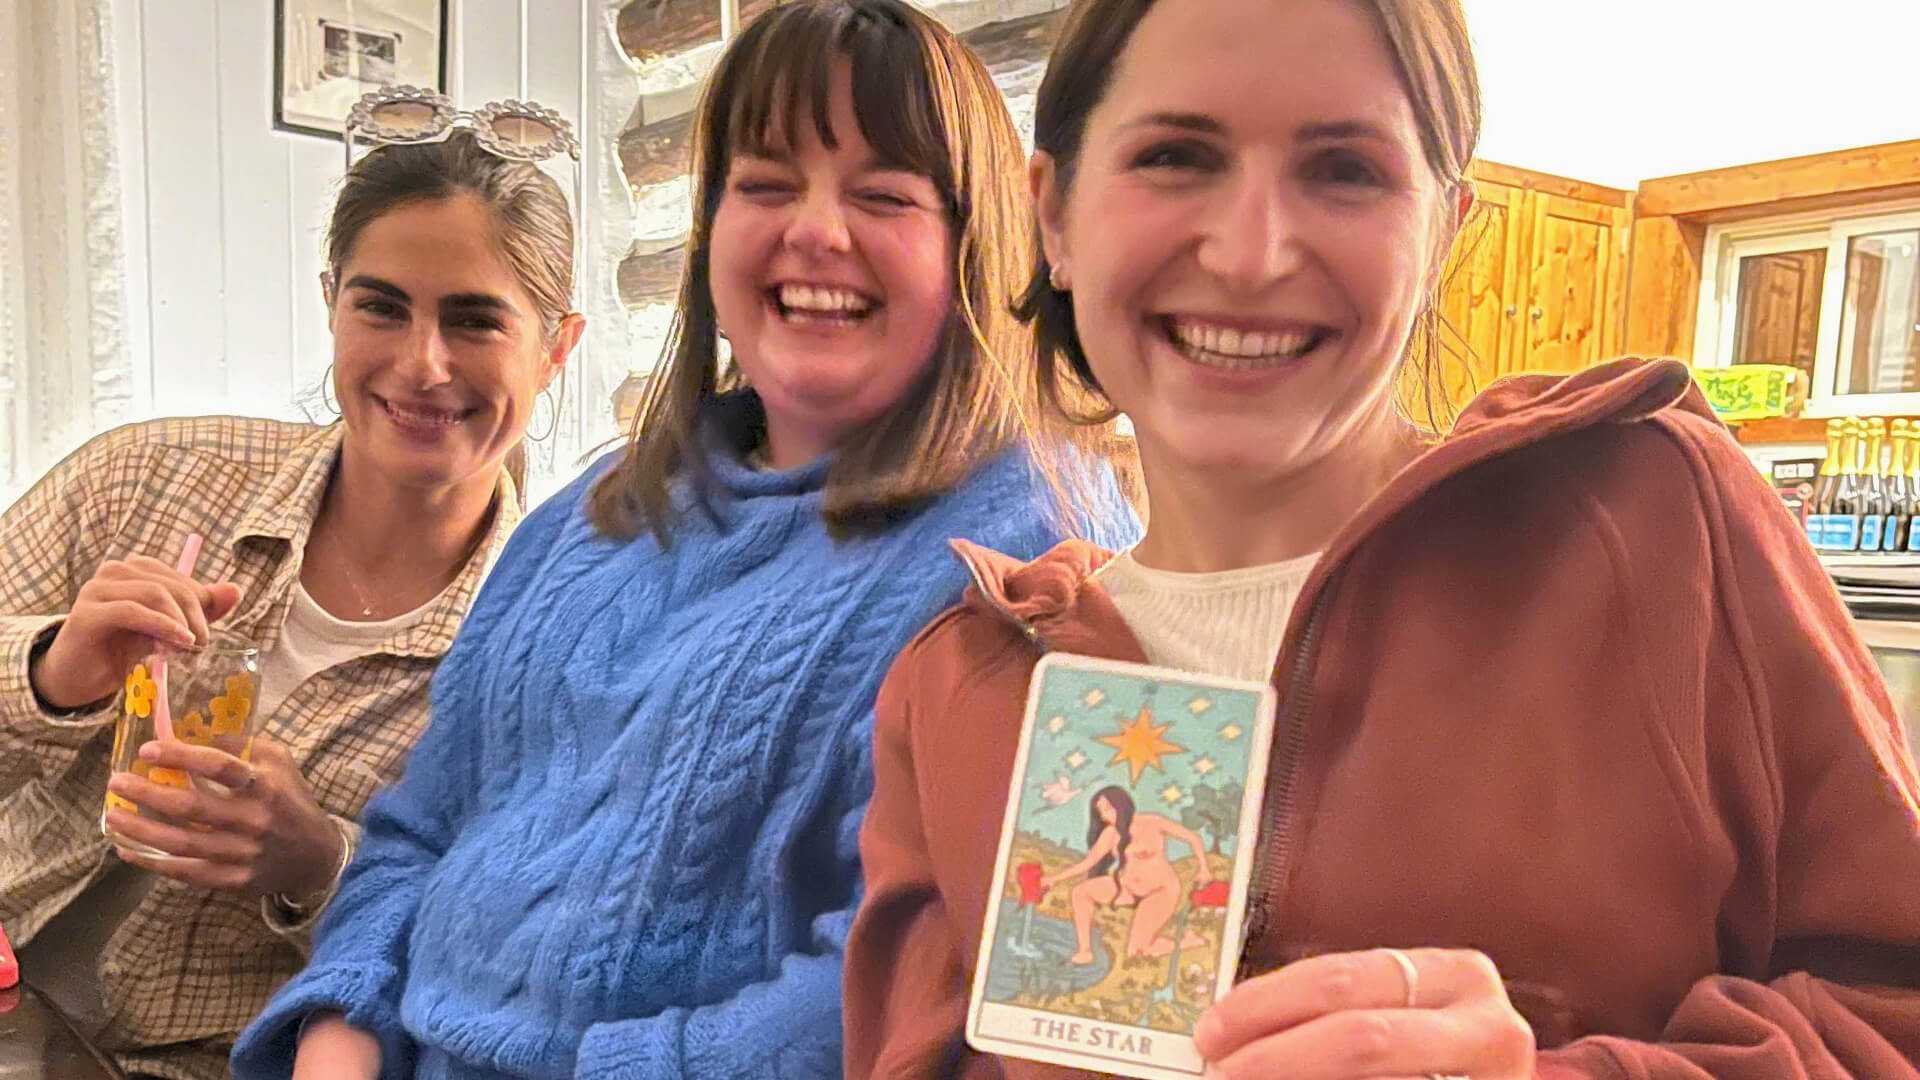 Women smile as they choose tarot cards at their vacation rental in Asheville, NC.